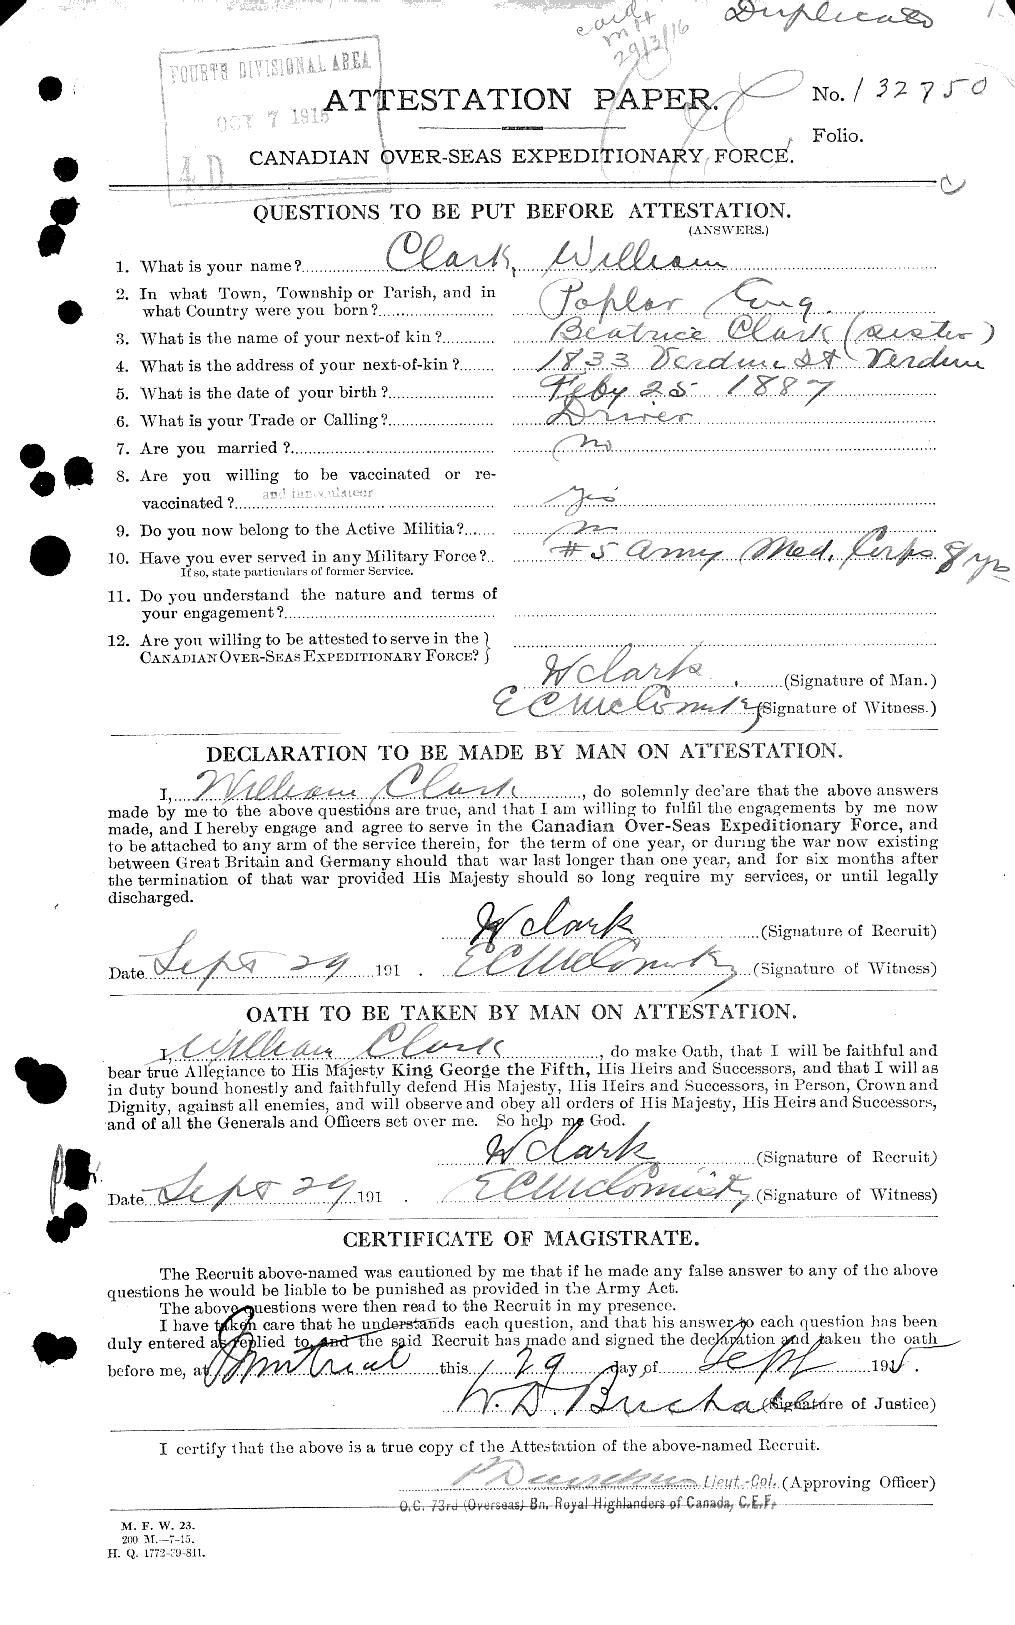 Personnel Records of the First World War - CEF 018959a